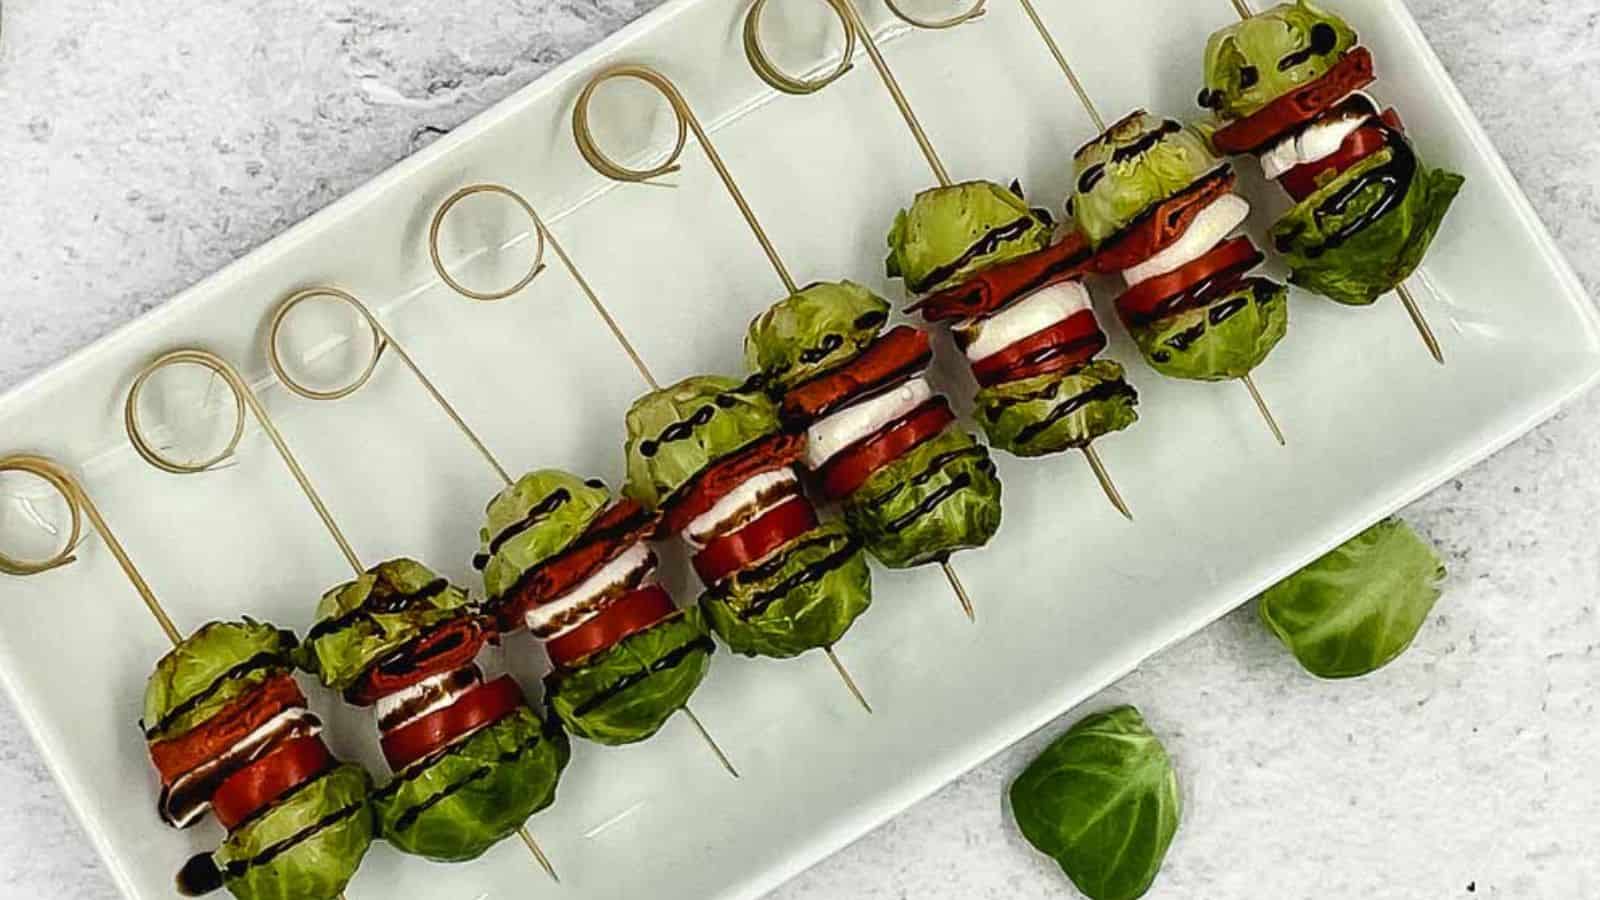 Brussels sprout skewers on a white plate.